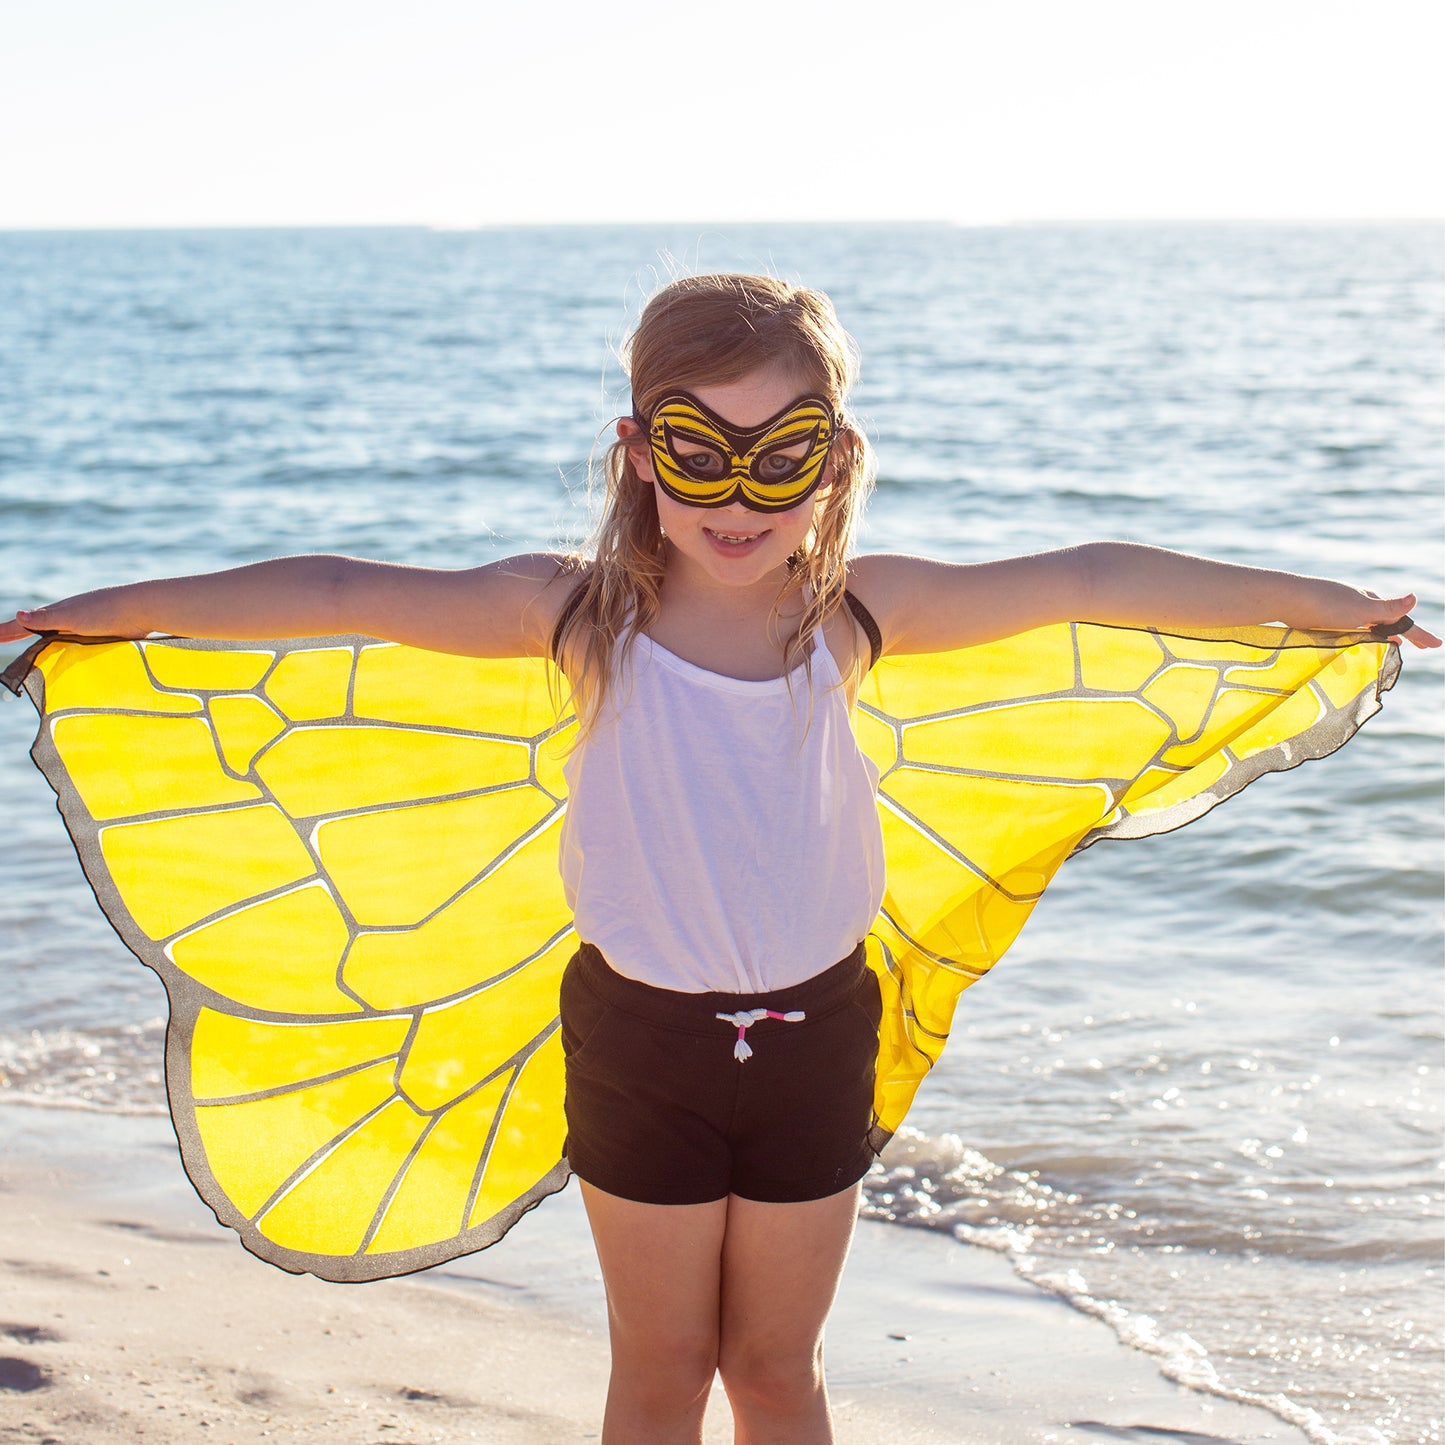 BUMBLEBEE WINGS + MASK in eco-friendly cotton gift bag